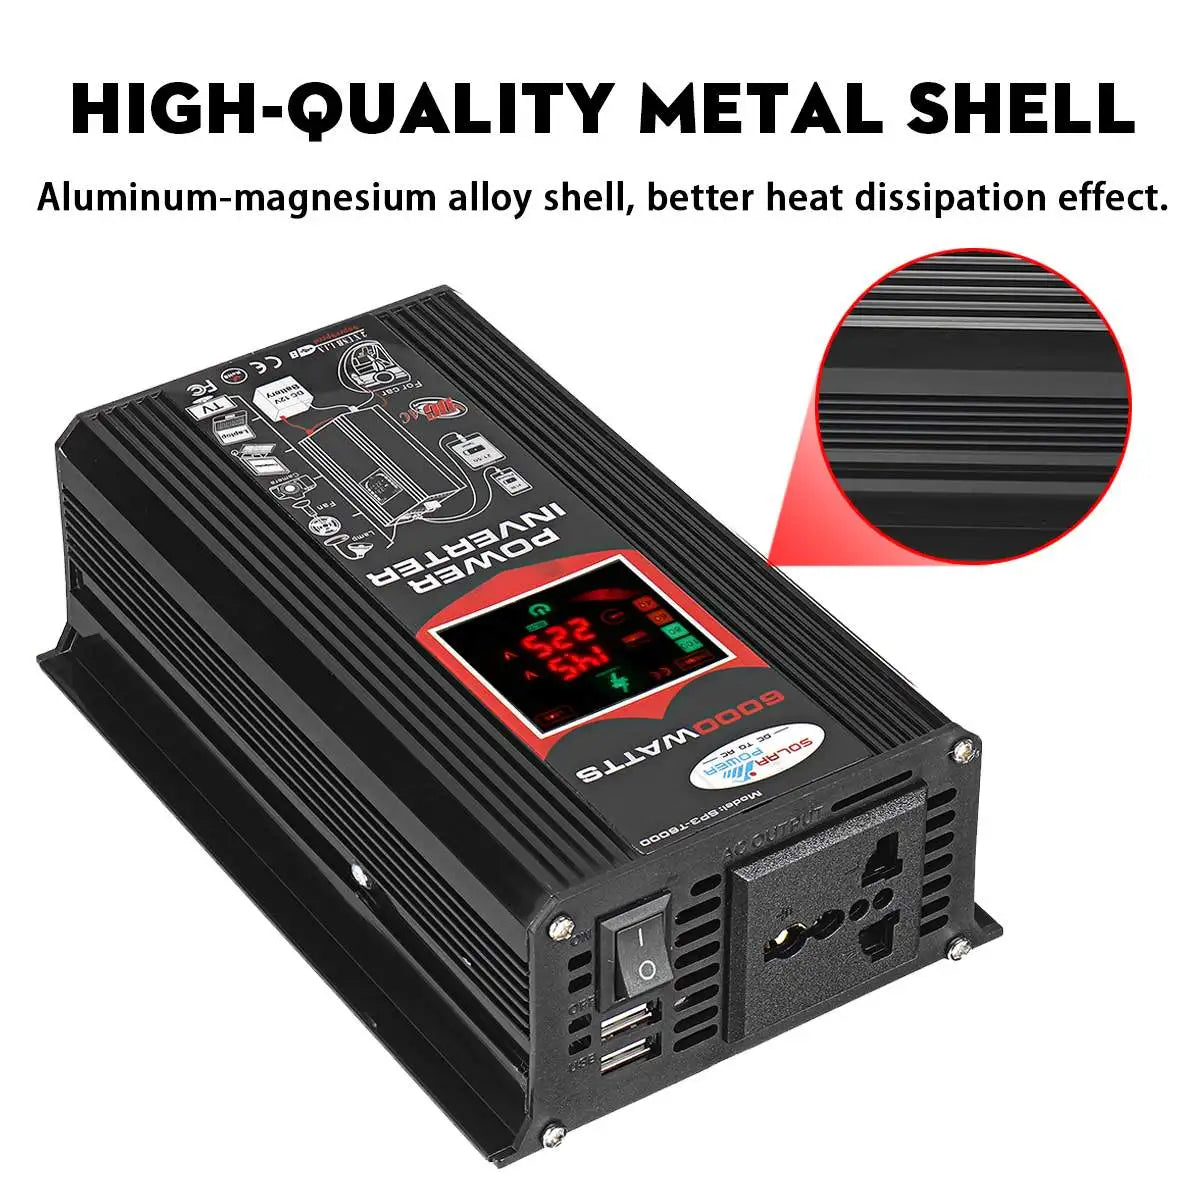 High-quality metal shell with aluminum-magnesium alloy for improved heat dissipation and durability.